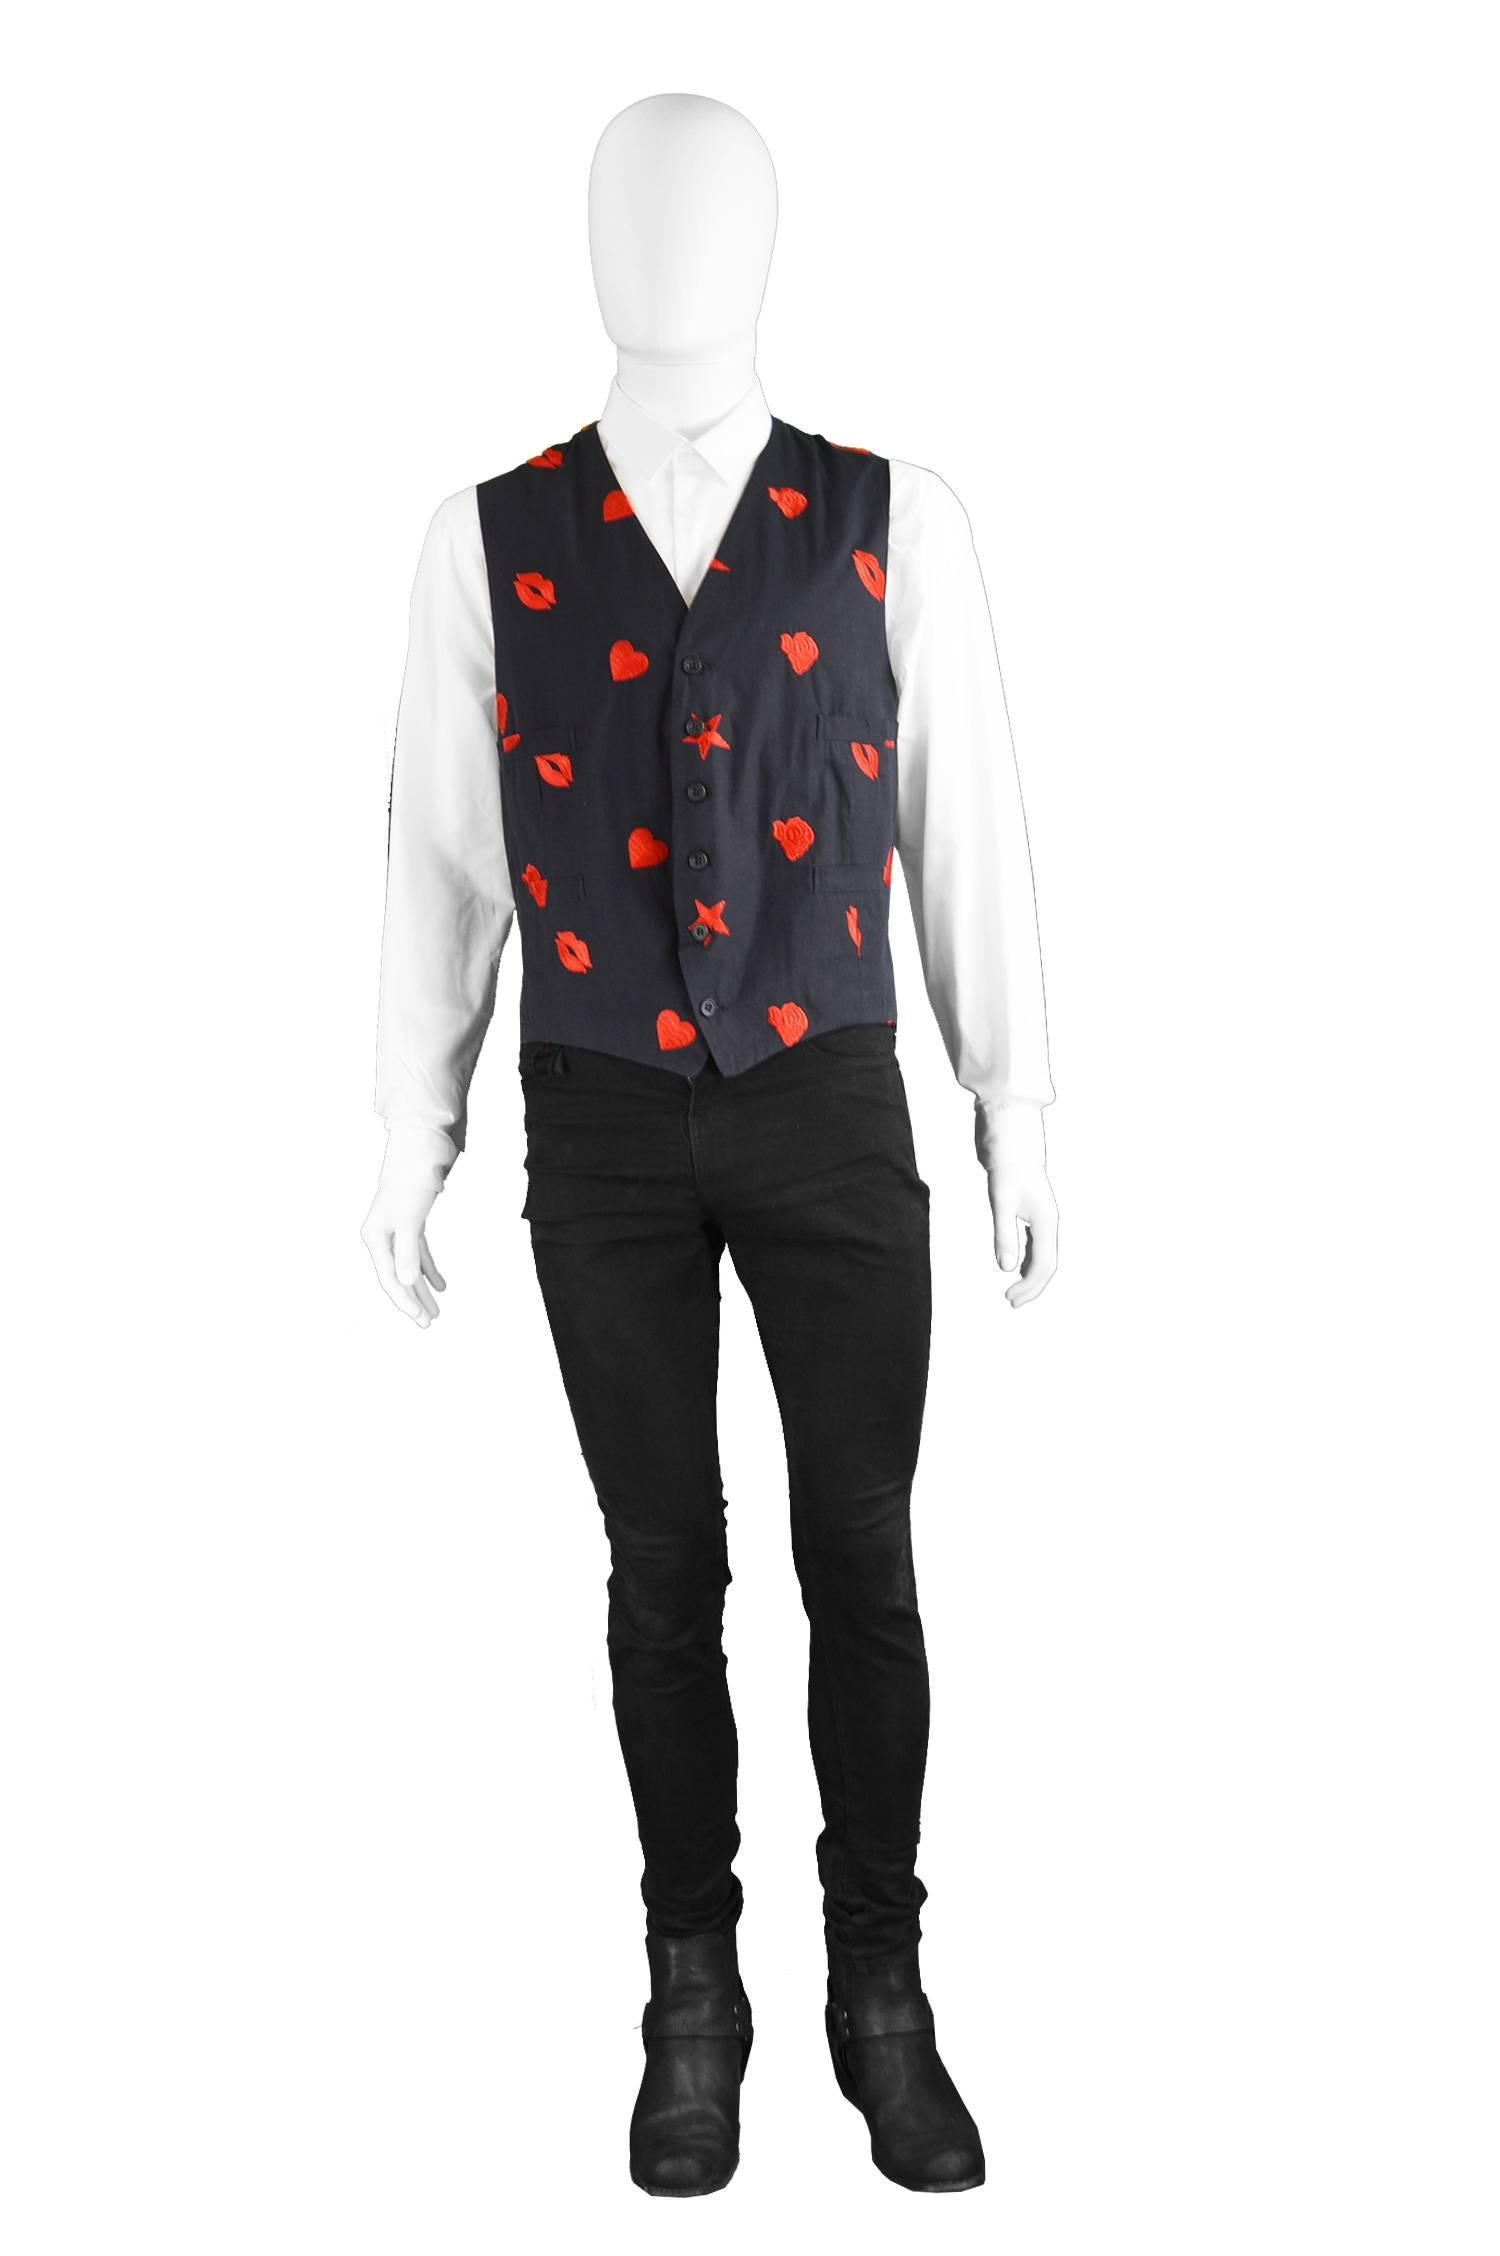 Paul Smith Men's Vintage Black & Red Embroidered Waistcoat, 1990s

Size: Marked XL but fits more like a modern Large. Please check measurements to ensure fit. 
Chest -42” / 106cm
Waist - 36” / 91cm (adjustable
Length (Shoulder to Hem) - 22” /